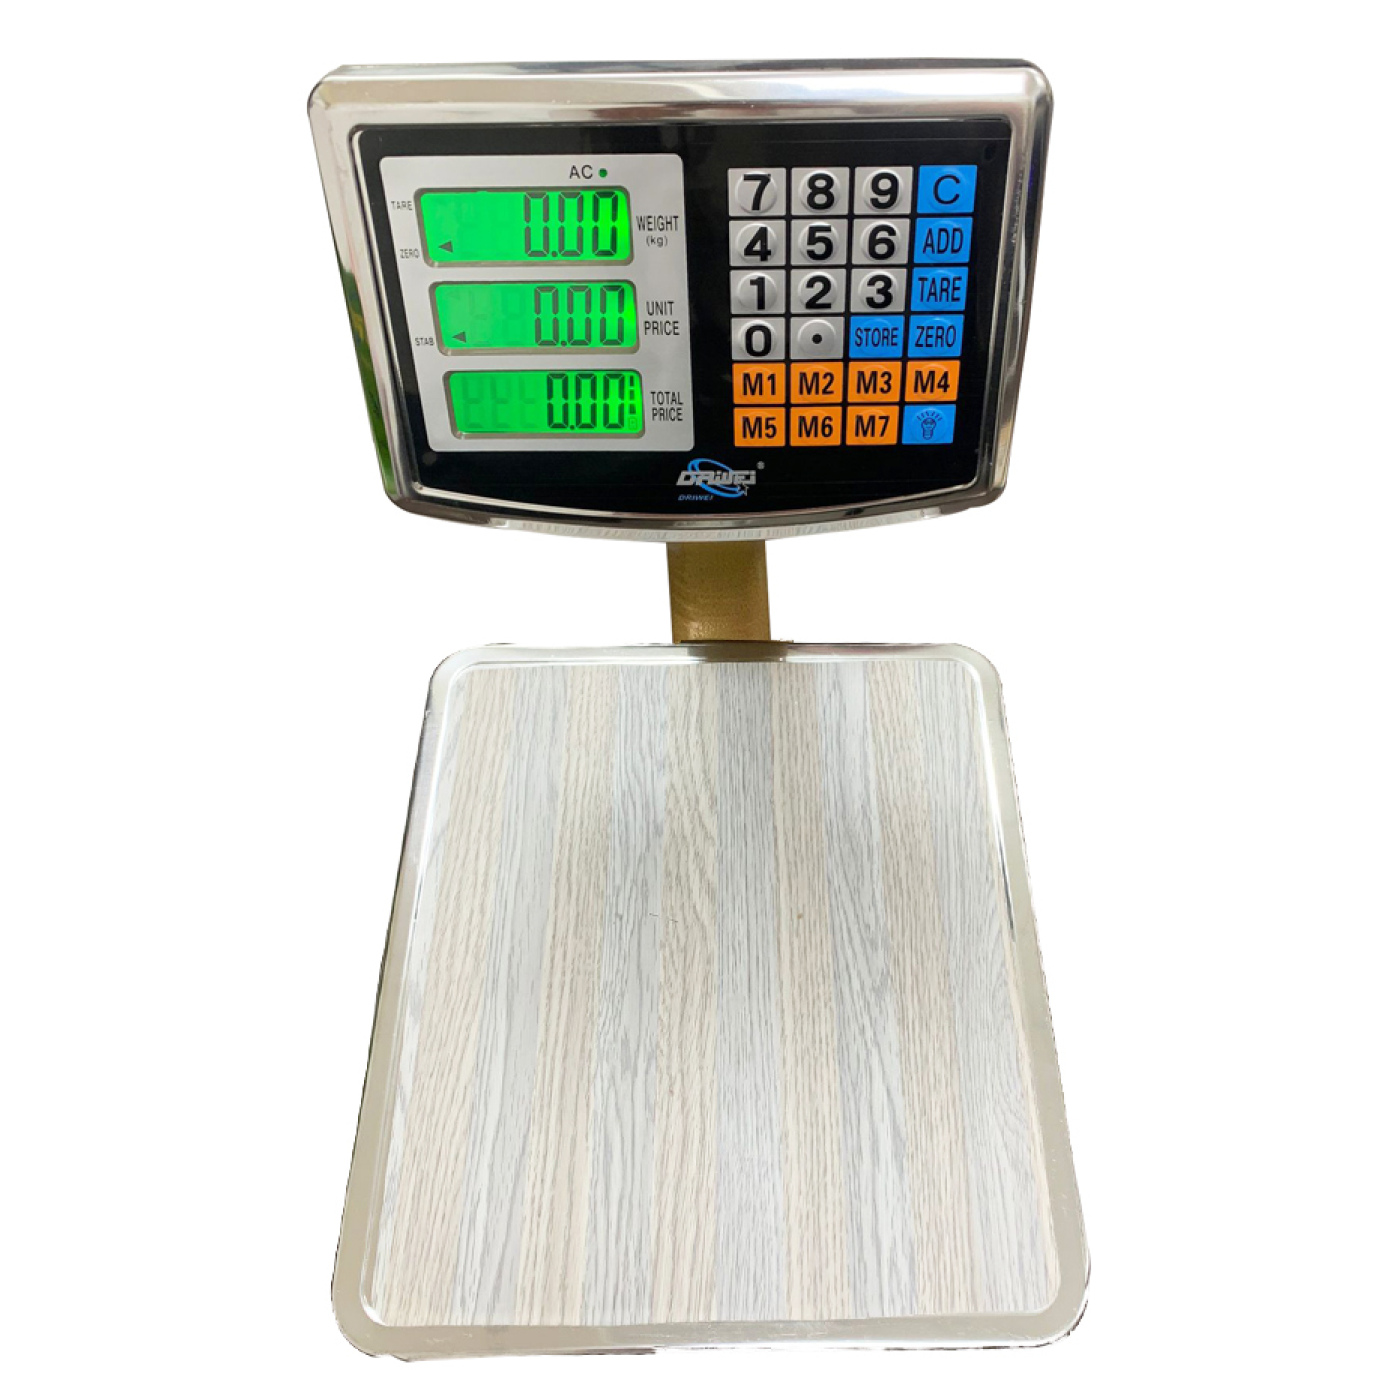 100 Kg Professional digital scale dual display, calculation and price storage *Driwei B35 *